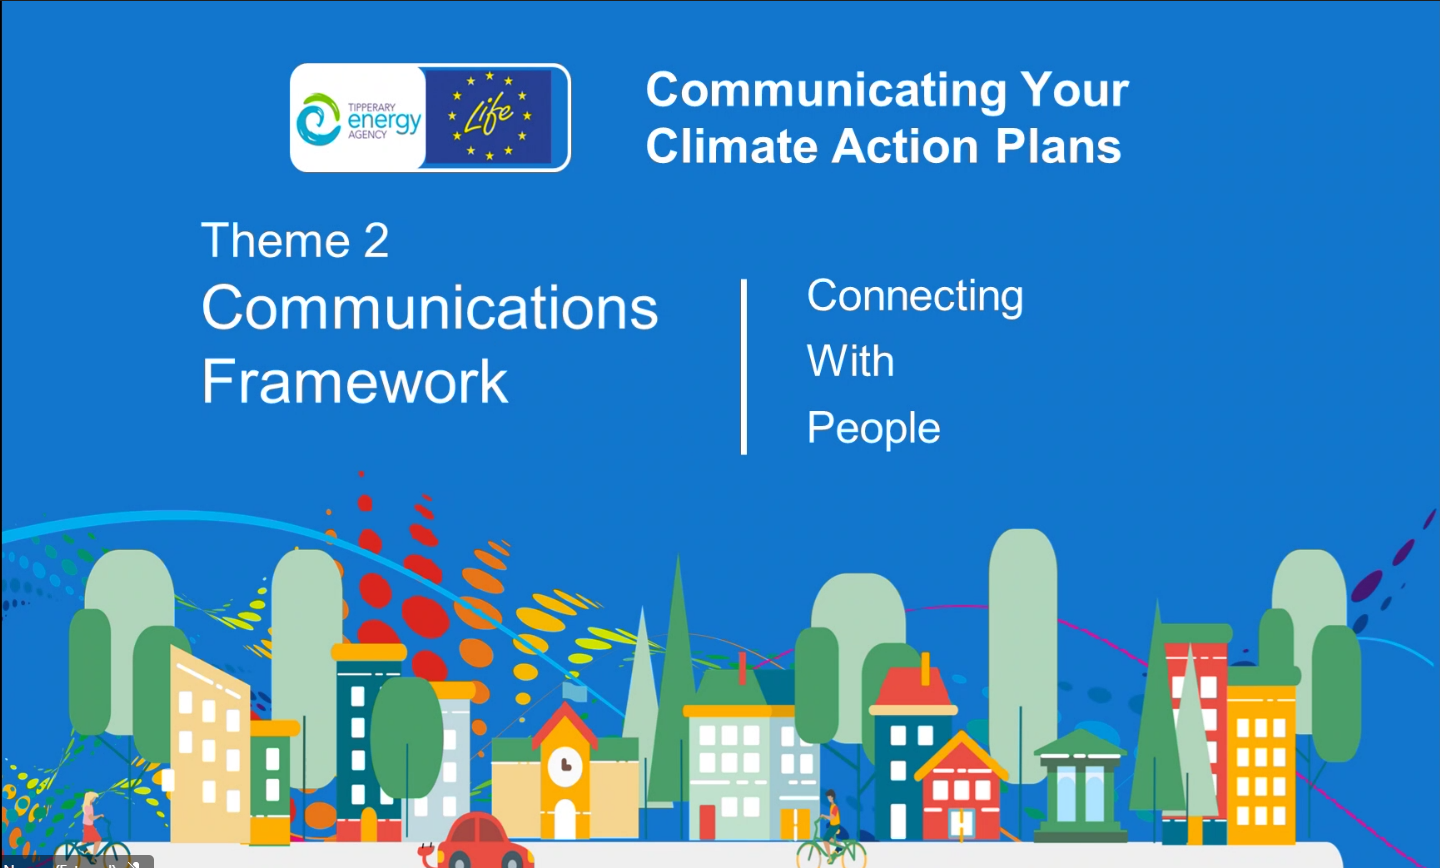 The first OwnYourSECAP workshops take place on Communications & Energy Management